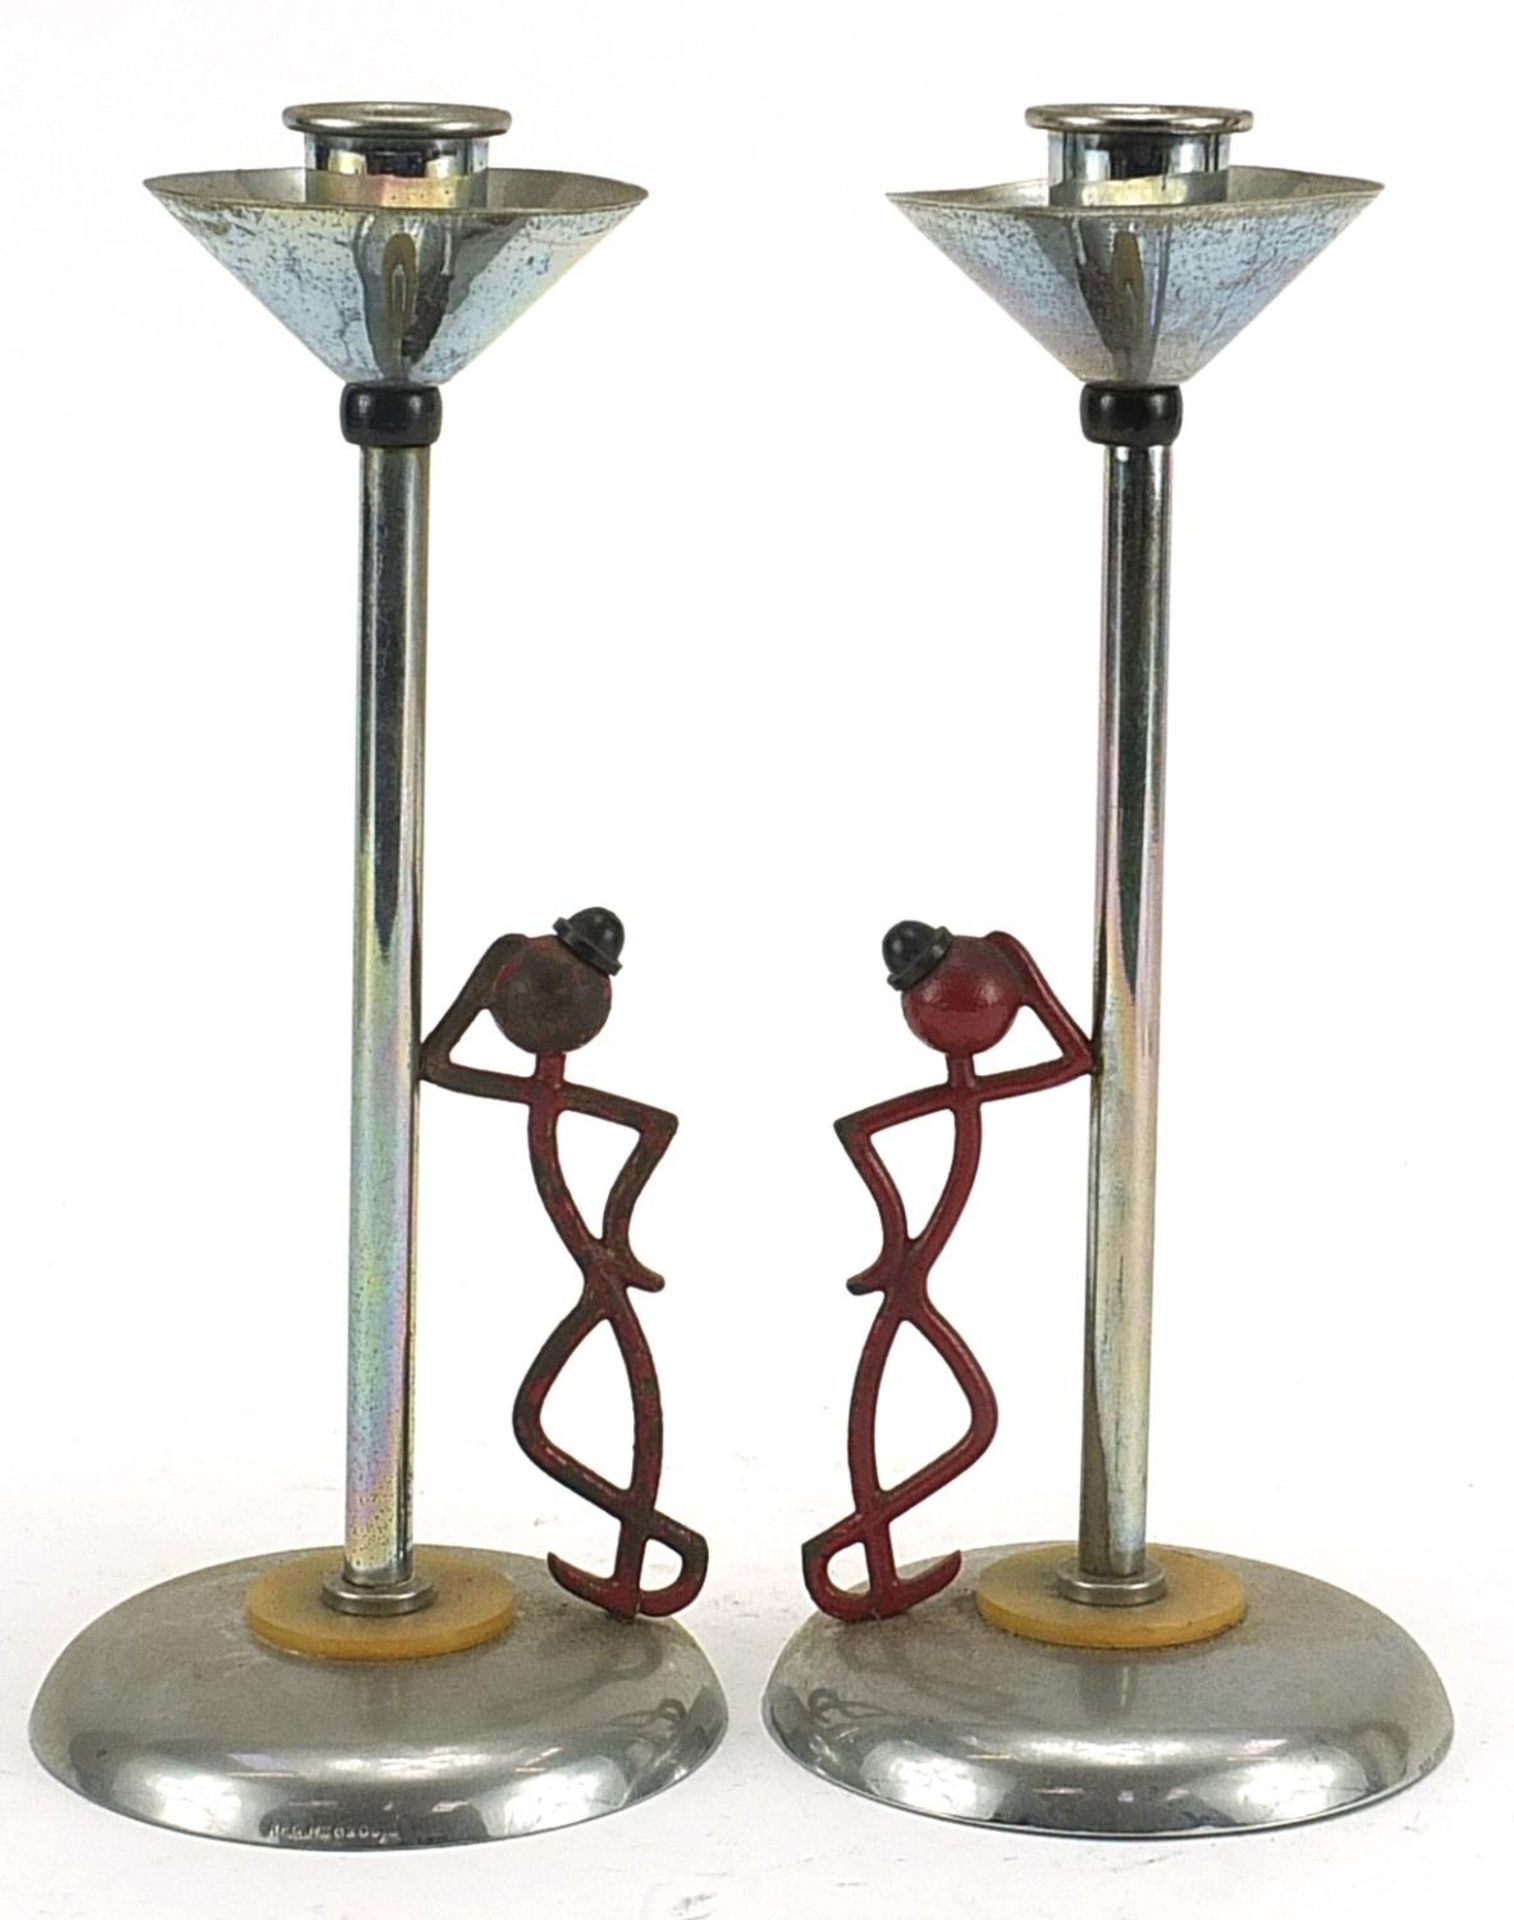 Pair of Art Deco partially painted chrome candlesticks in the form of a figure leaning against a - Image 2 of 4